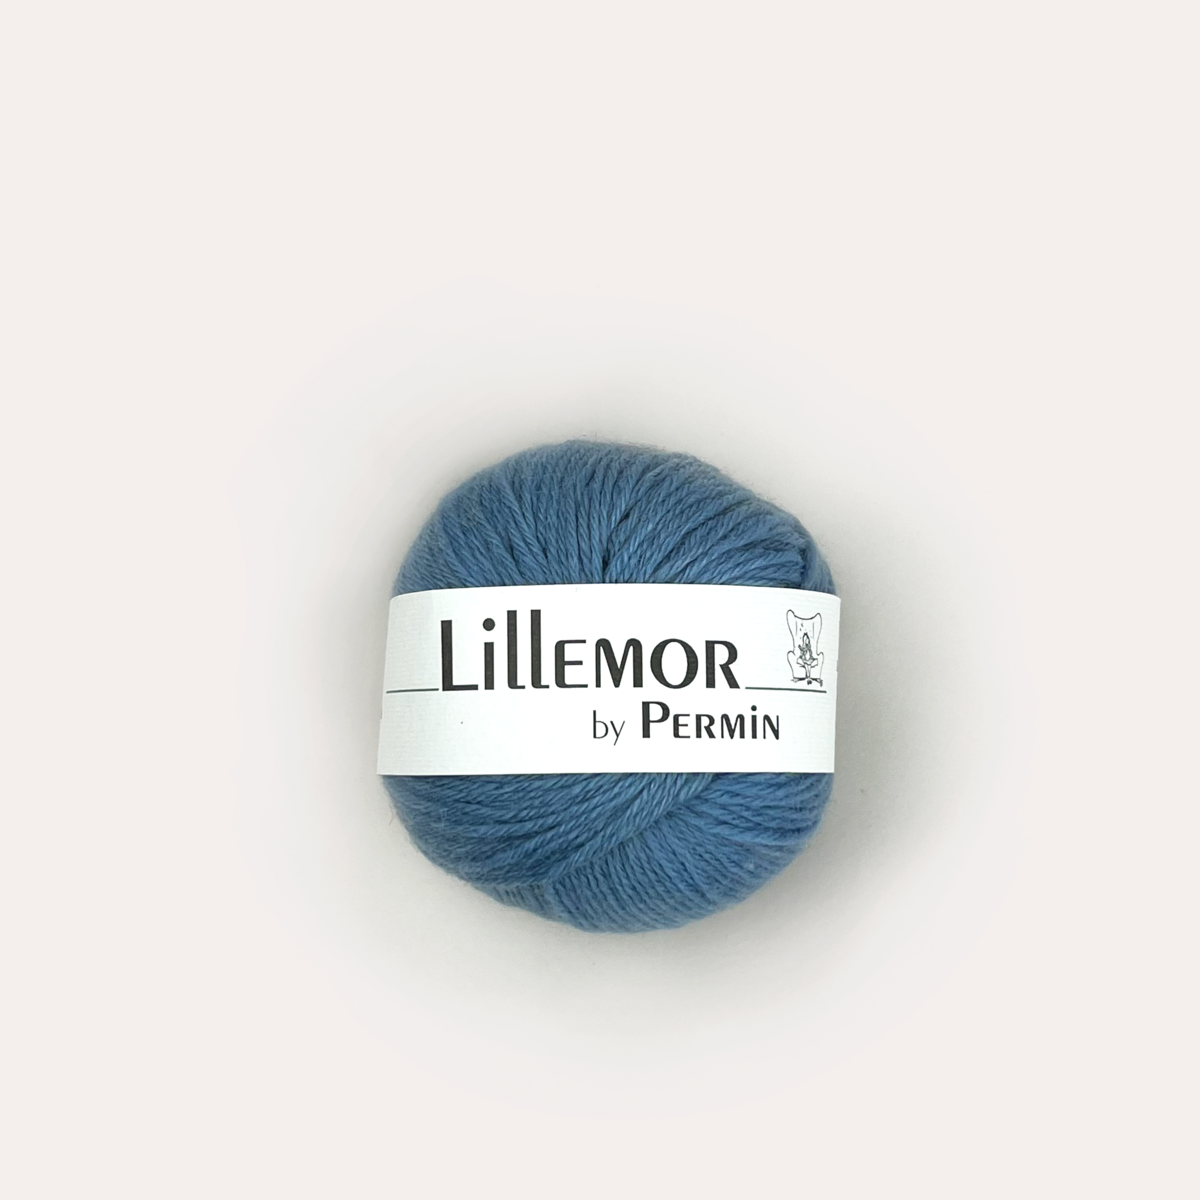 Lillemor | by Permin